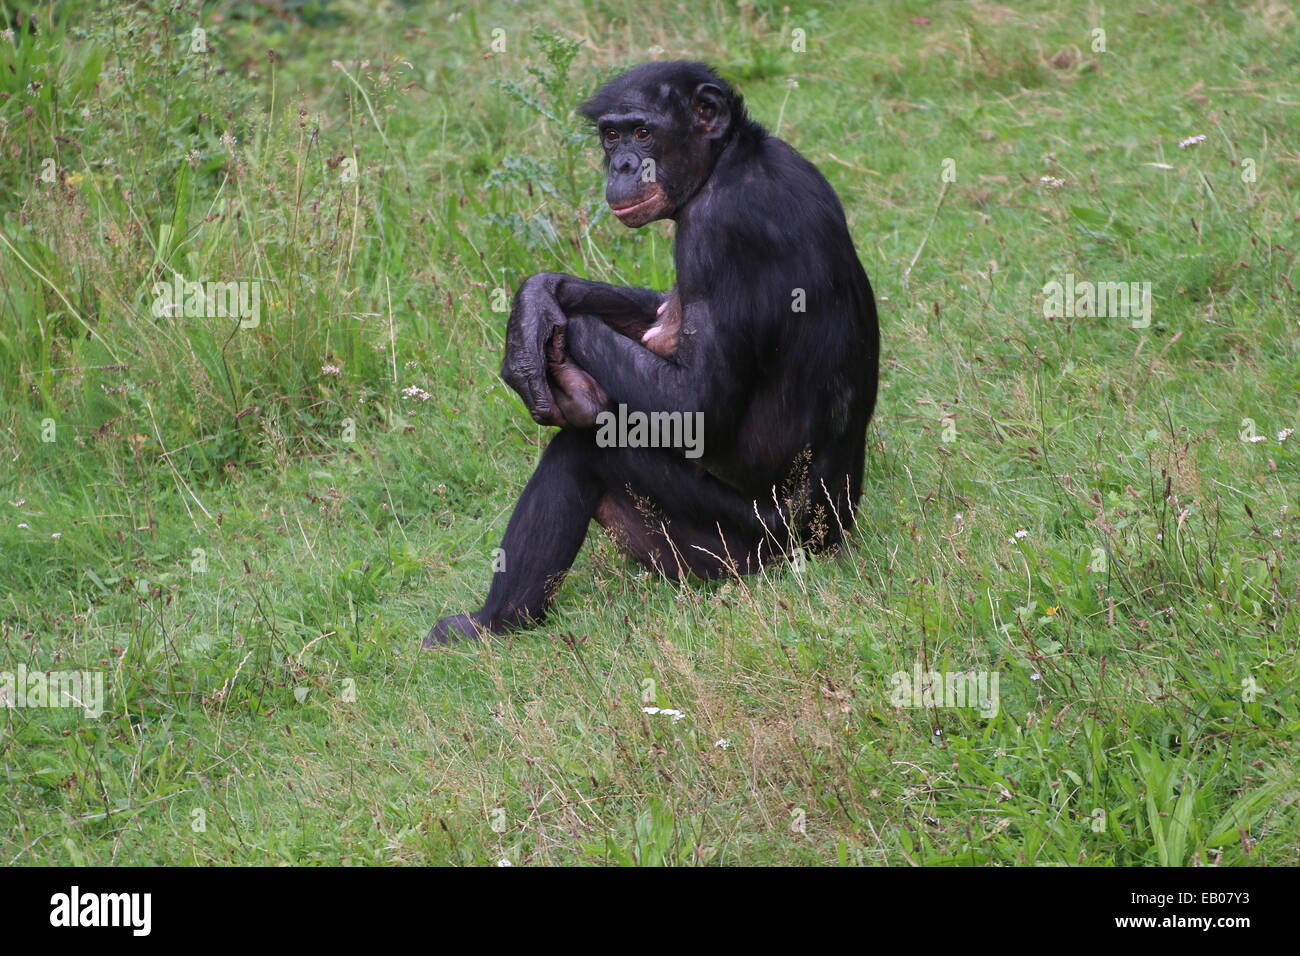 Mature Female Bonobo or (formerly) Pygmy Chimpanzee (Pan Paniscus) in a natural setting Stock Photo